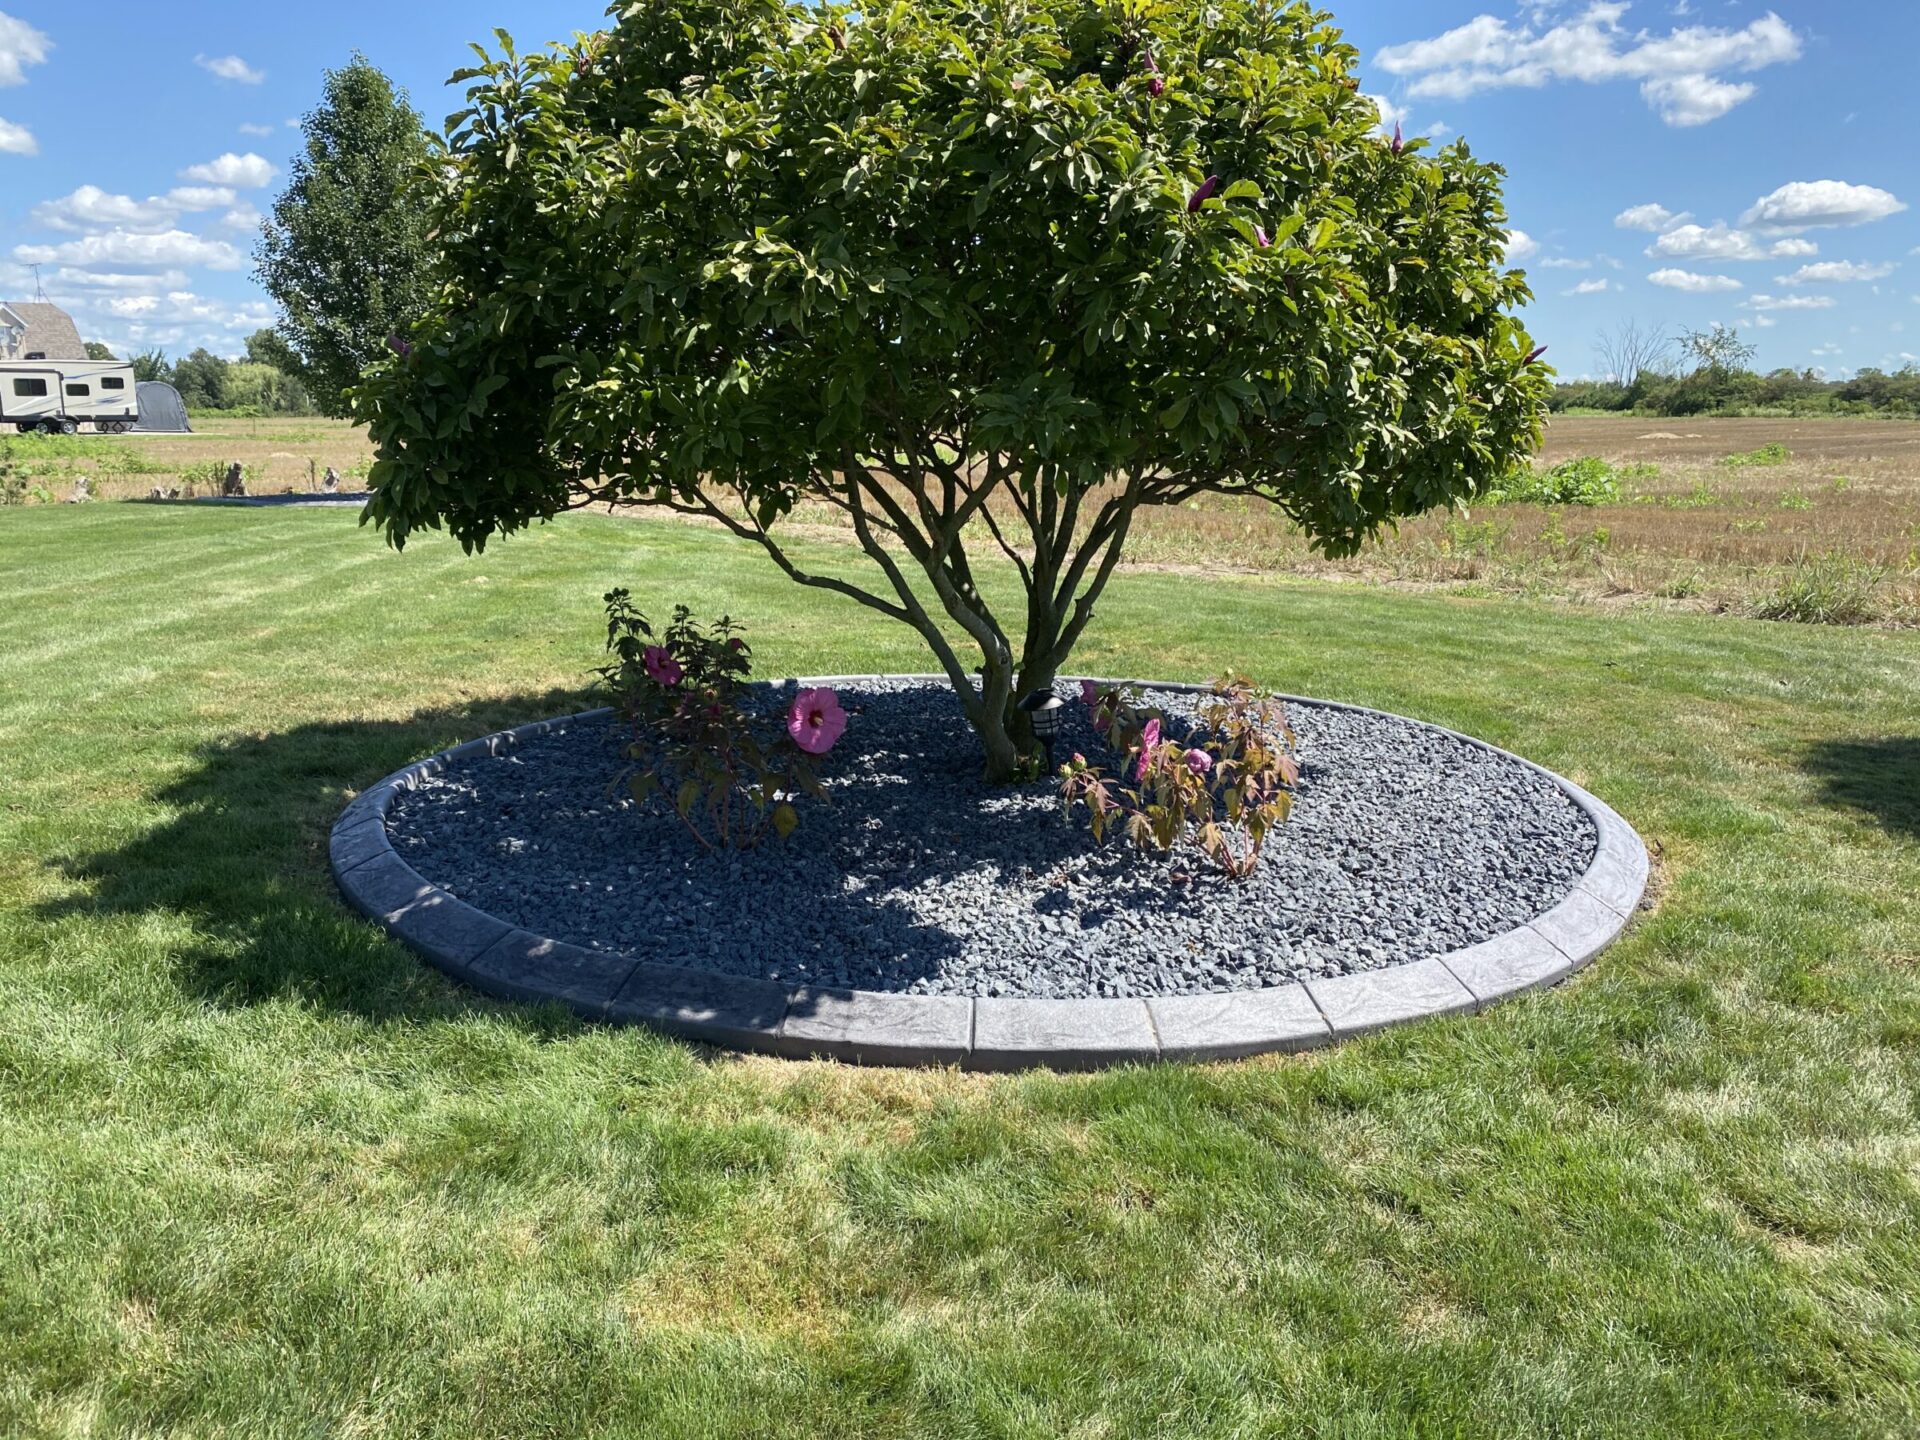 A landscaped garden with a circular gravel bed, young tree, flowering shrubs, and a neatly trimmed lawn on a sunny day, clear skies, and an RV visible.